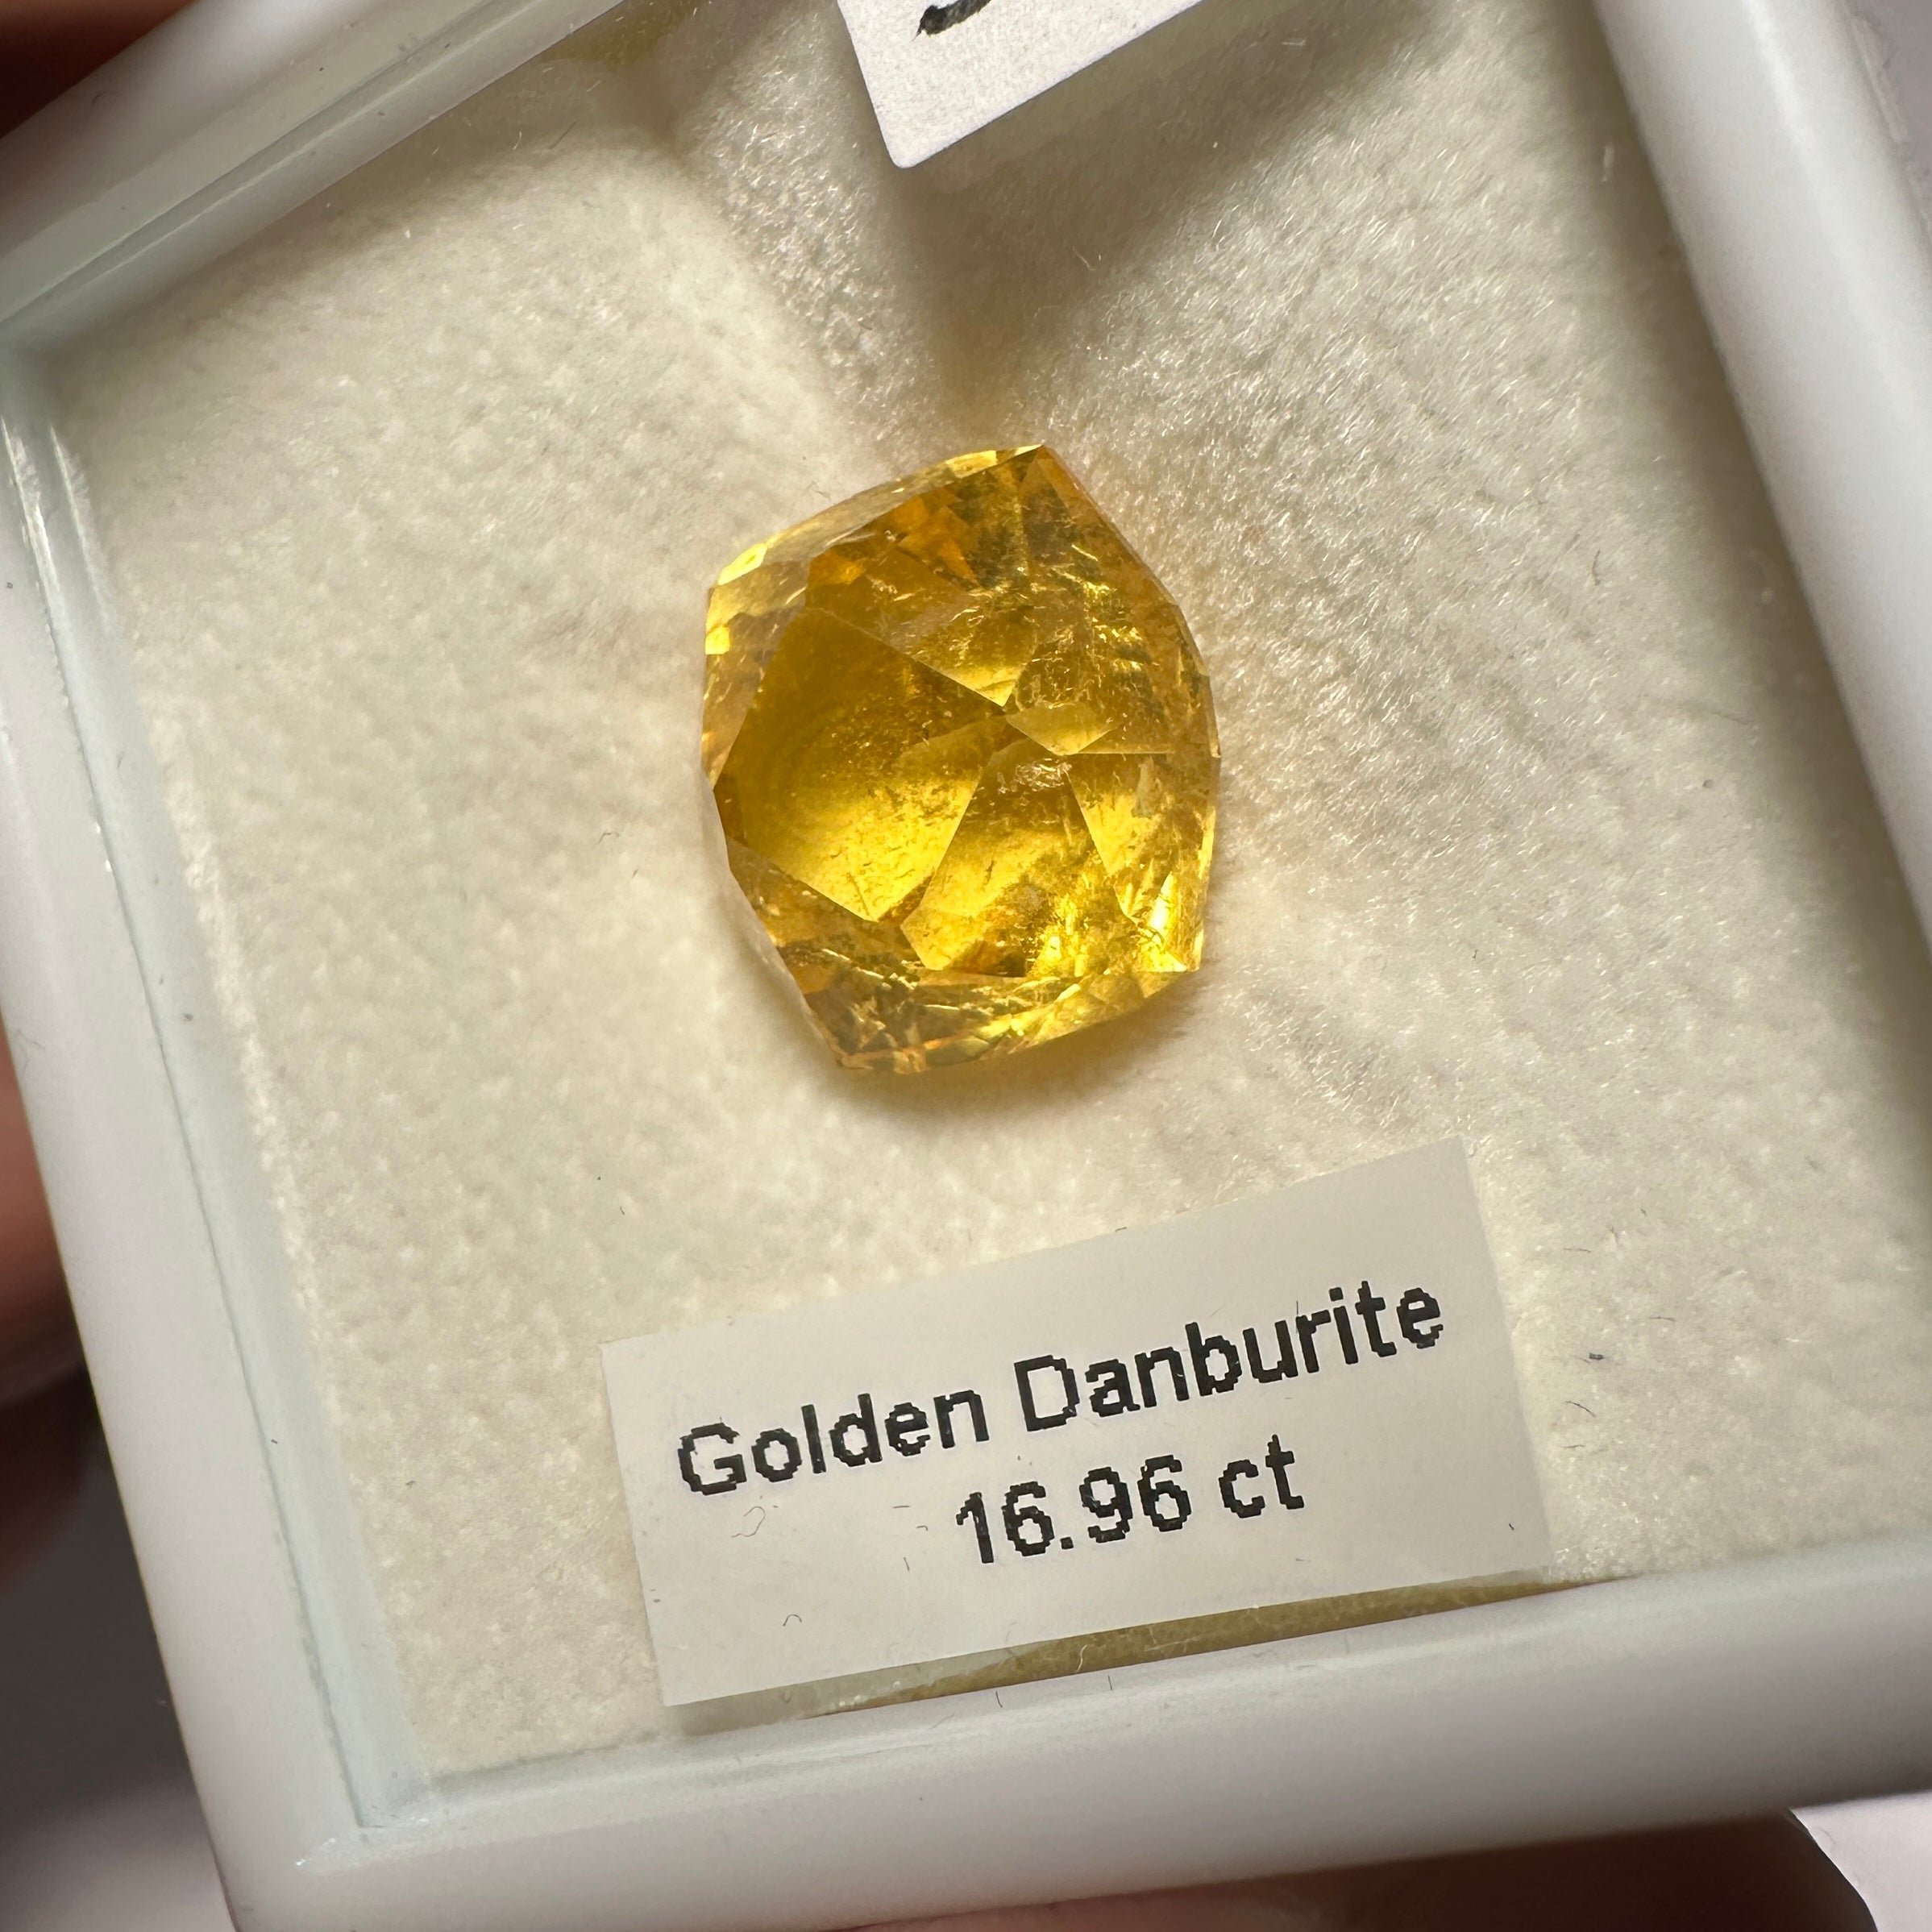 16.96ct Golden Danburite, Tanzania, Untreated Unheated. Precision Cut, Collectors Stone, Very Rare and Difficult To Get In This Size and Vibrancy